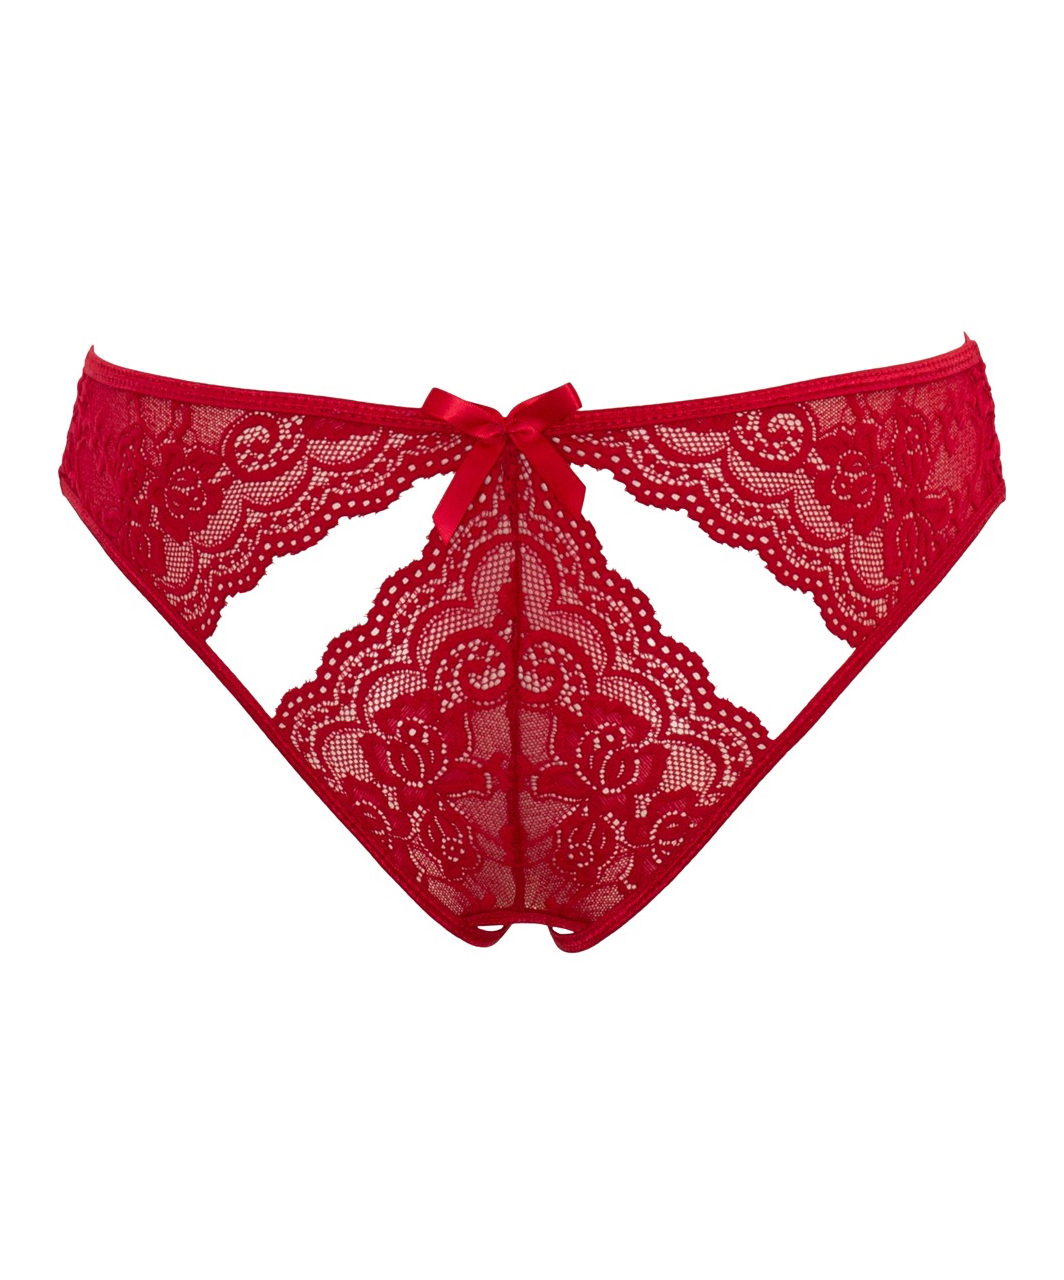 Mandy Mystery Line red lace crotchless thong